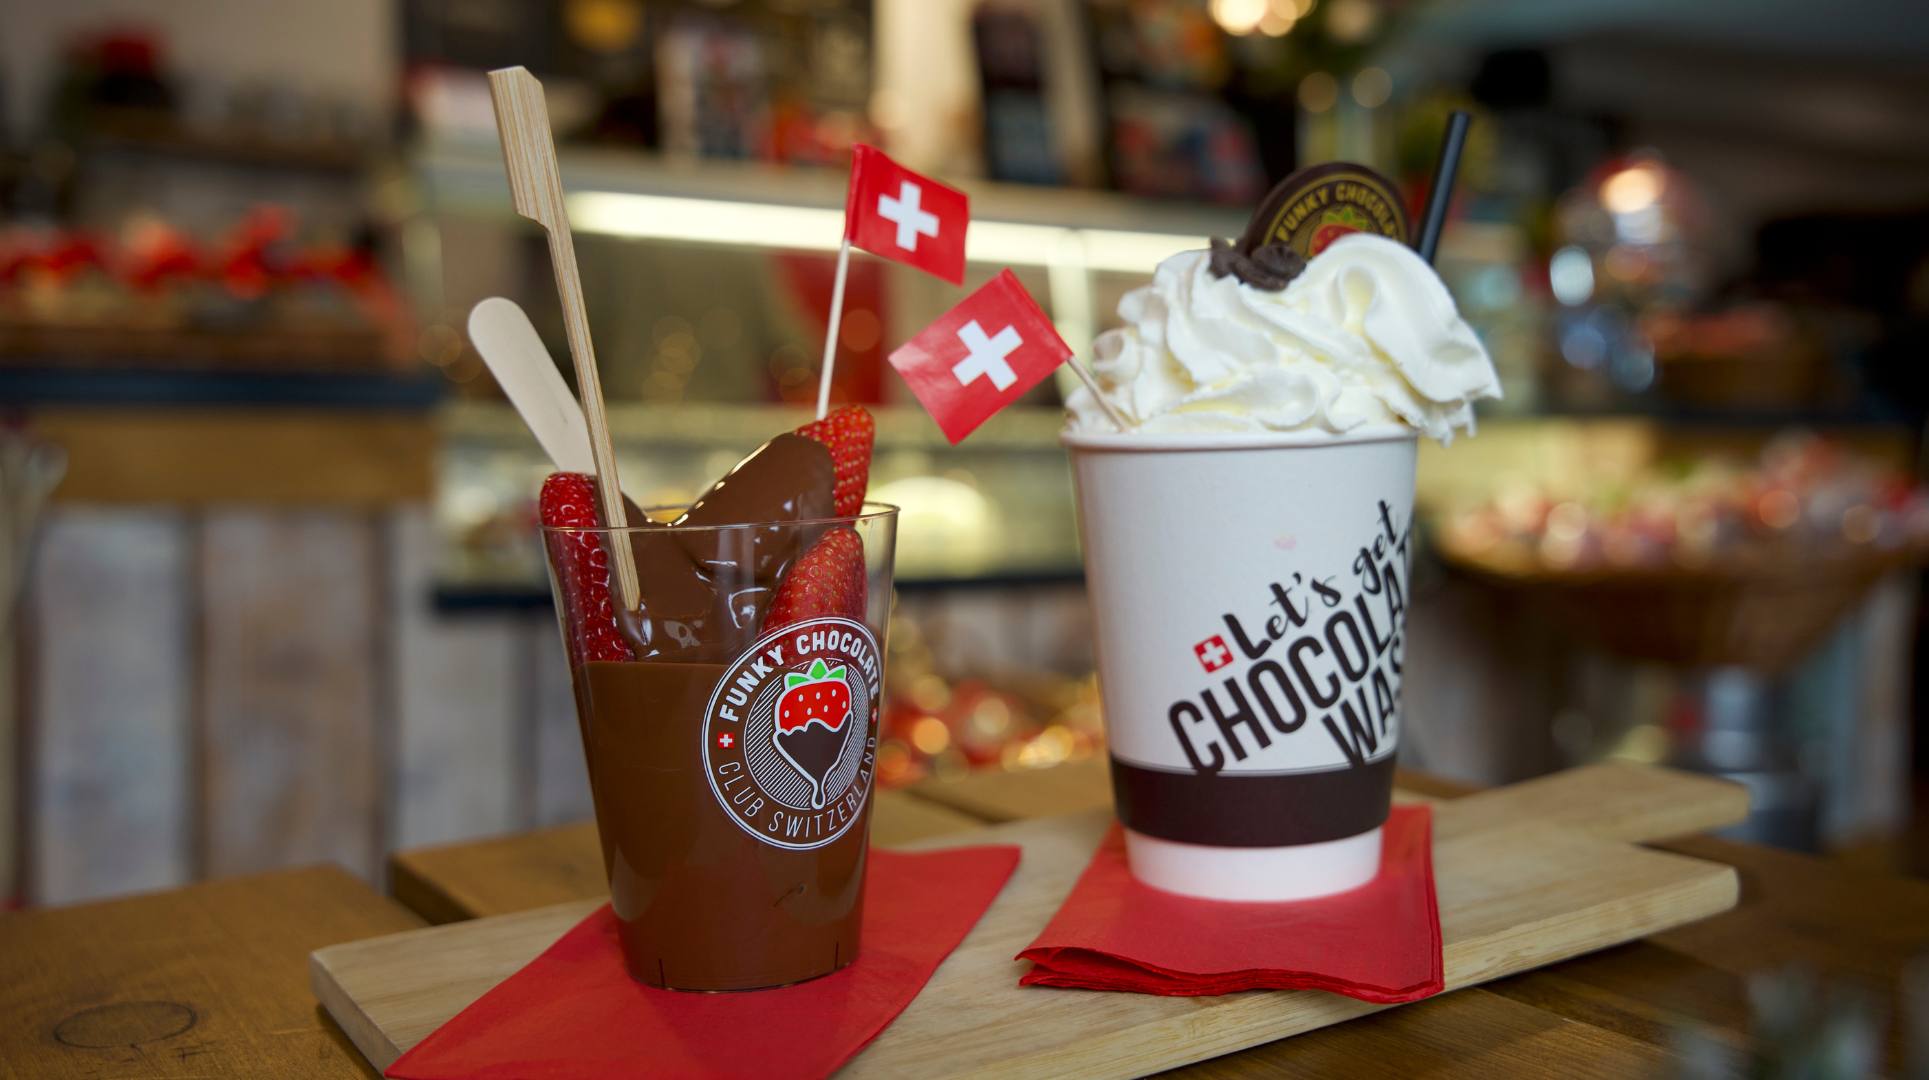 Let's get chocolate wasted in Interlaken